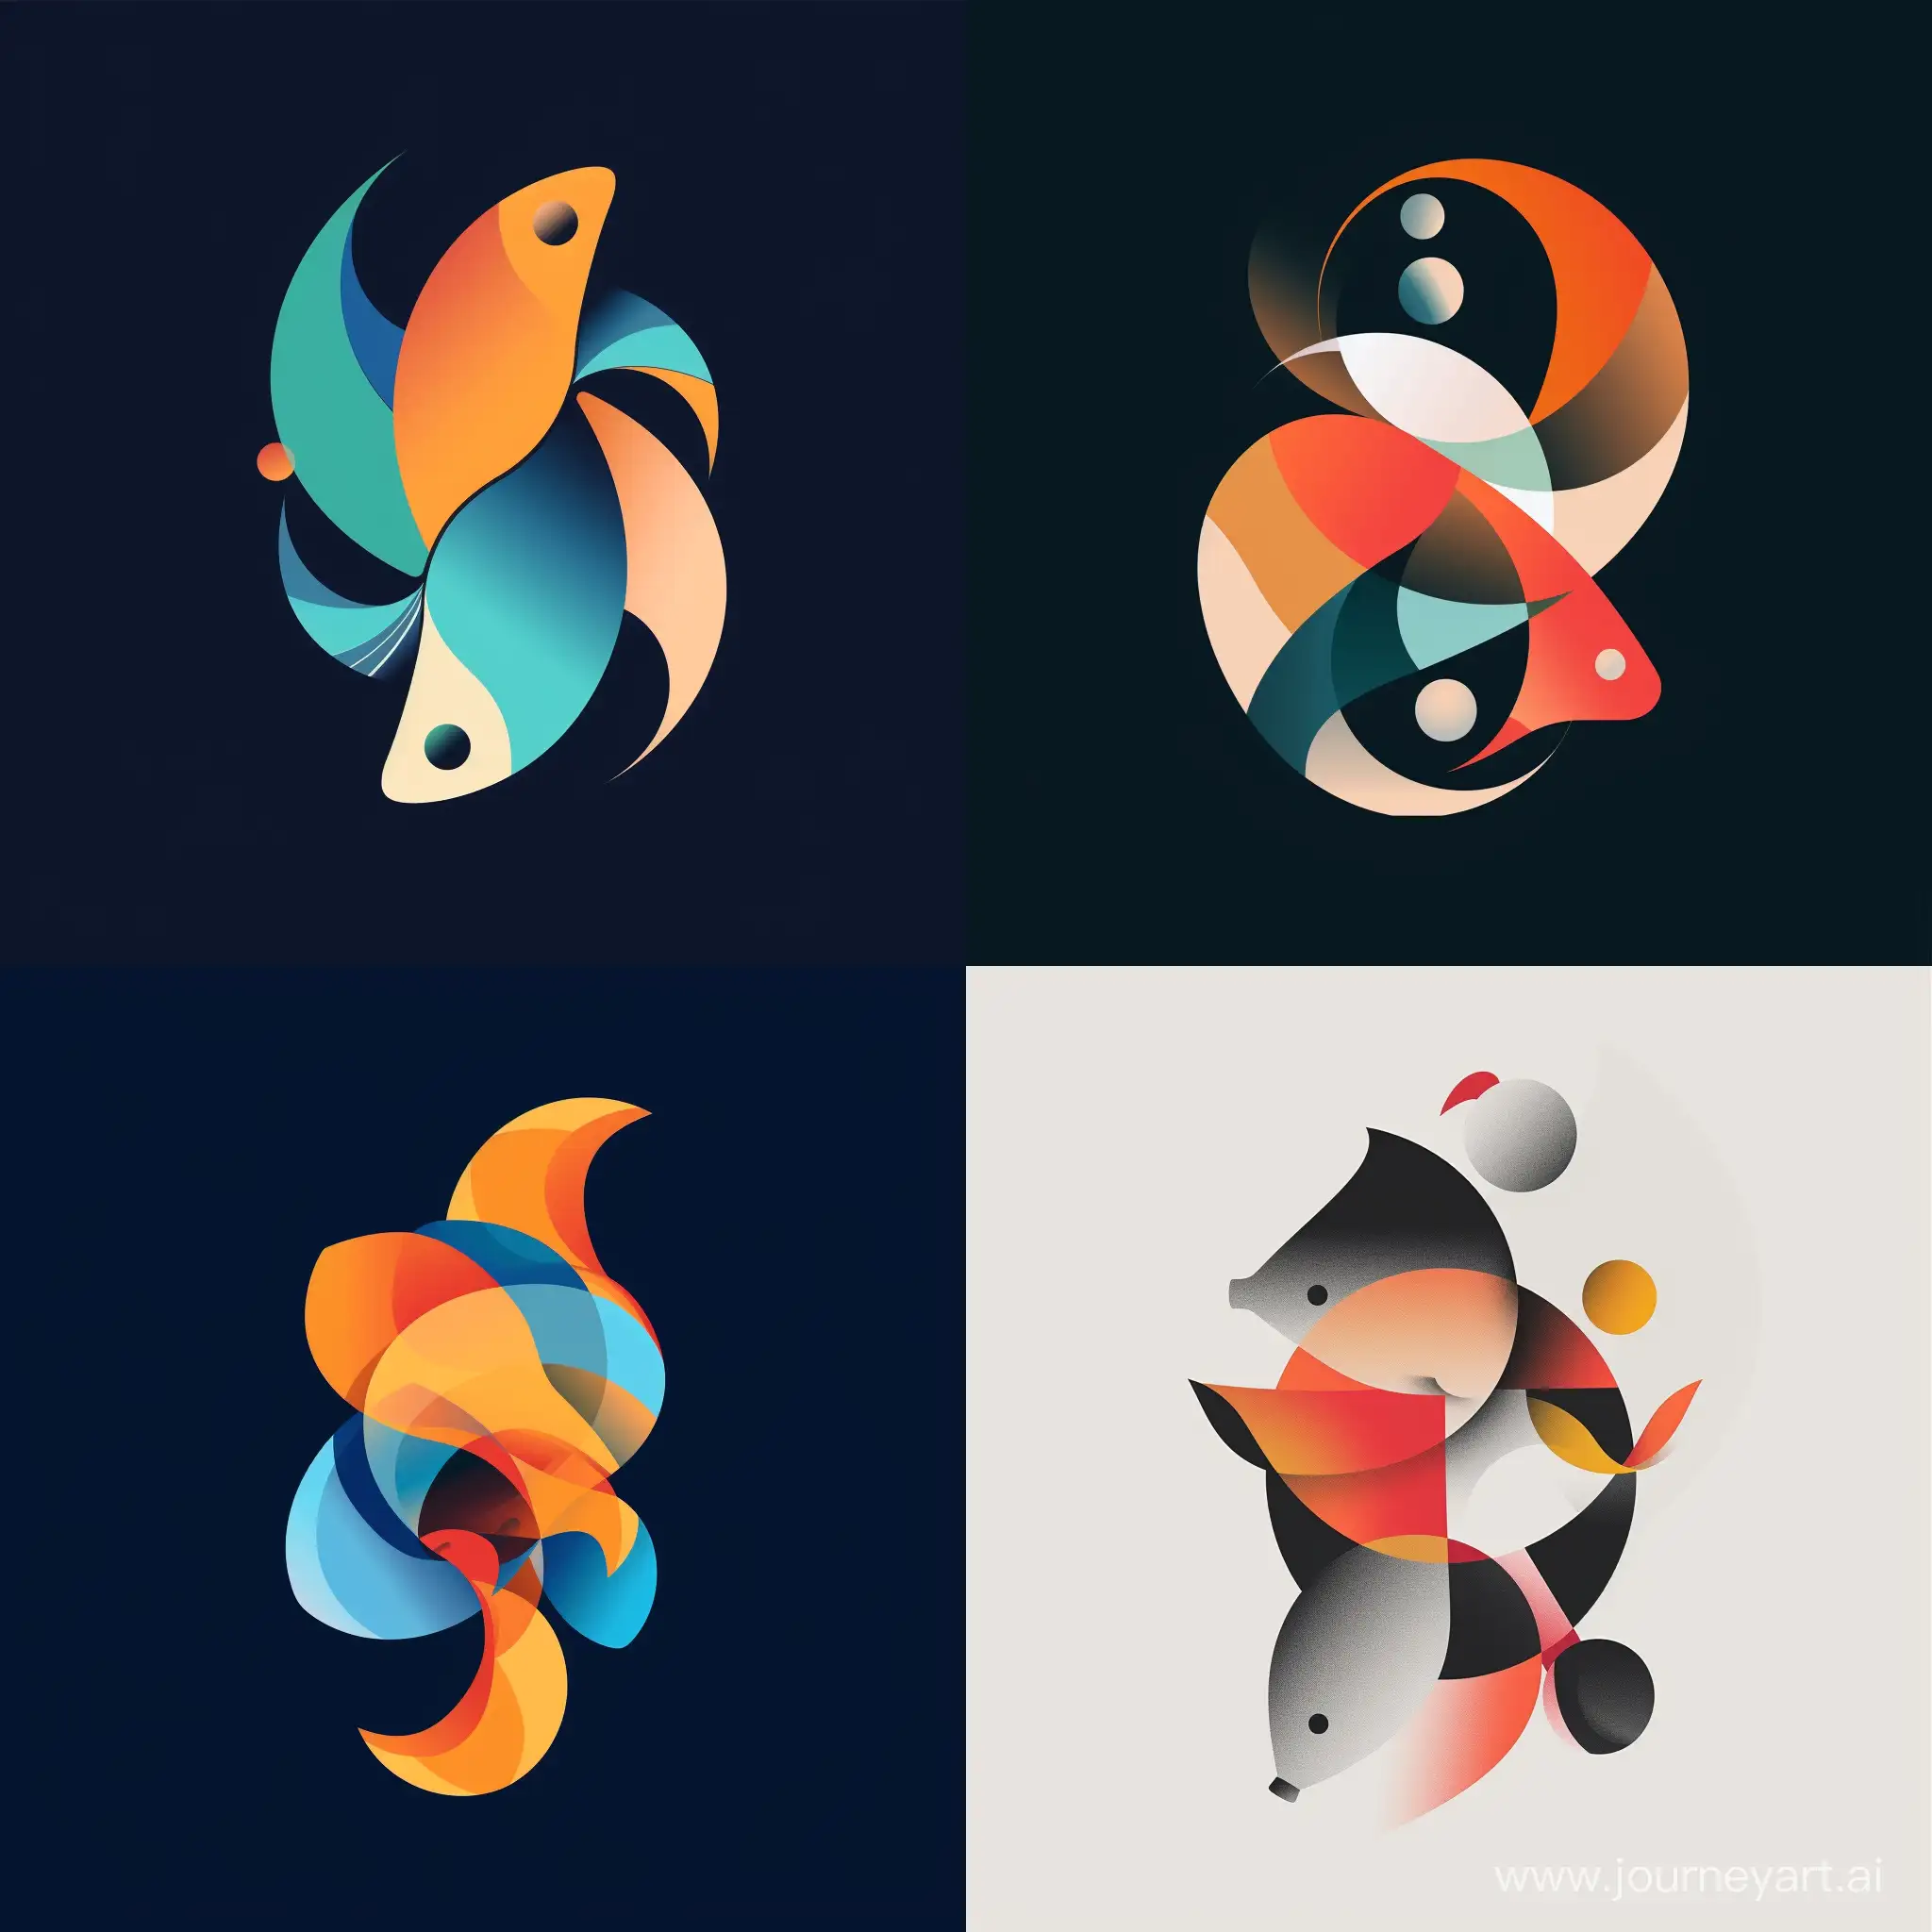 Abstract-Aquaculture-Logo-Design-with-Unusual-Shapes-and-Colors